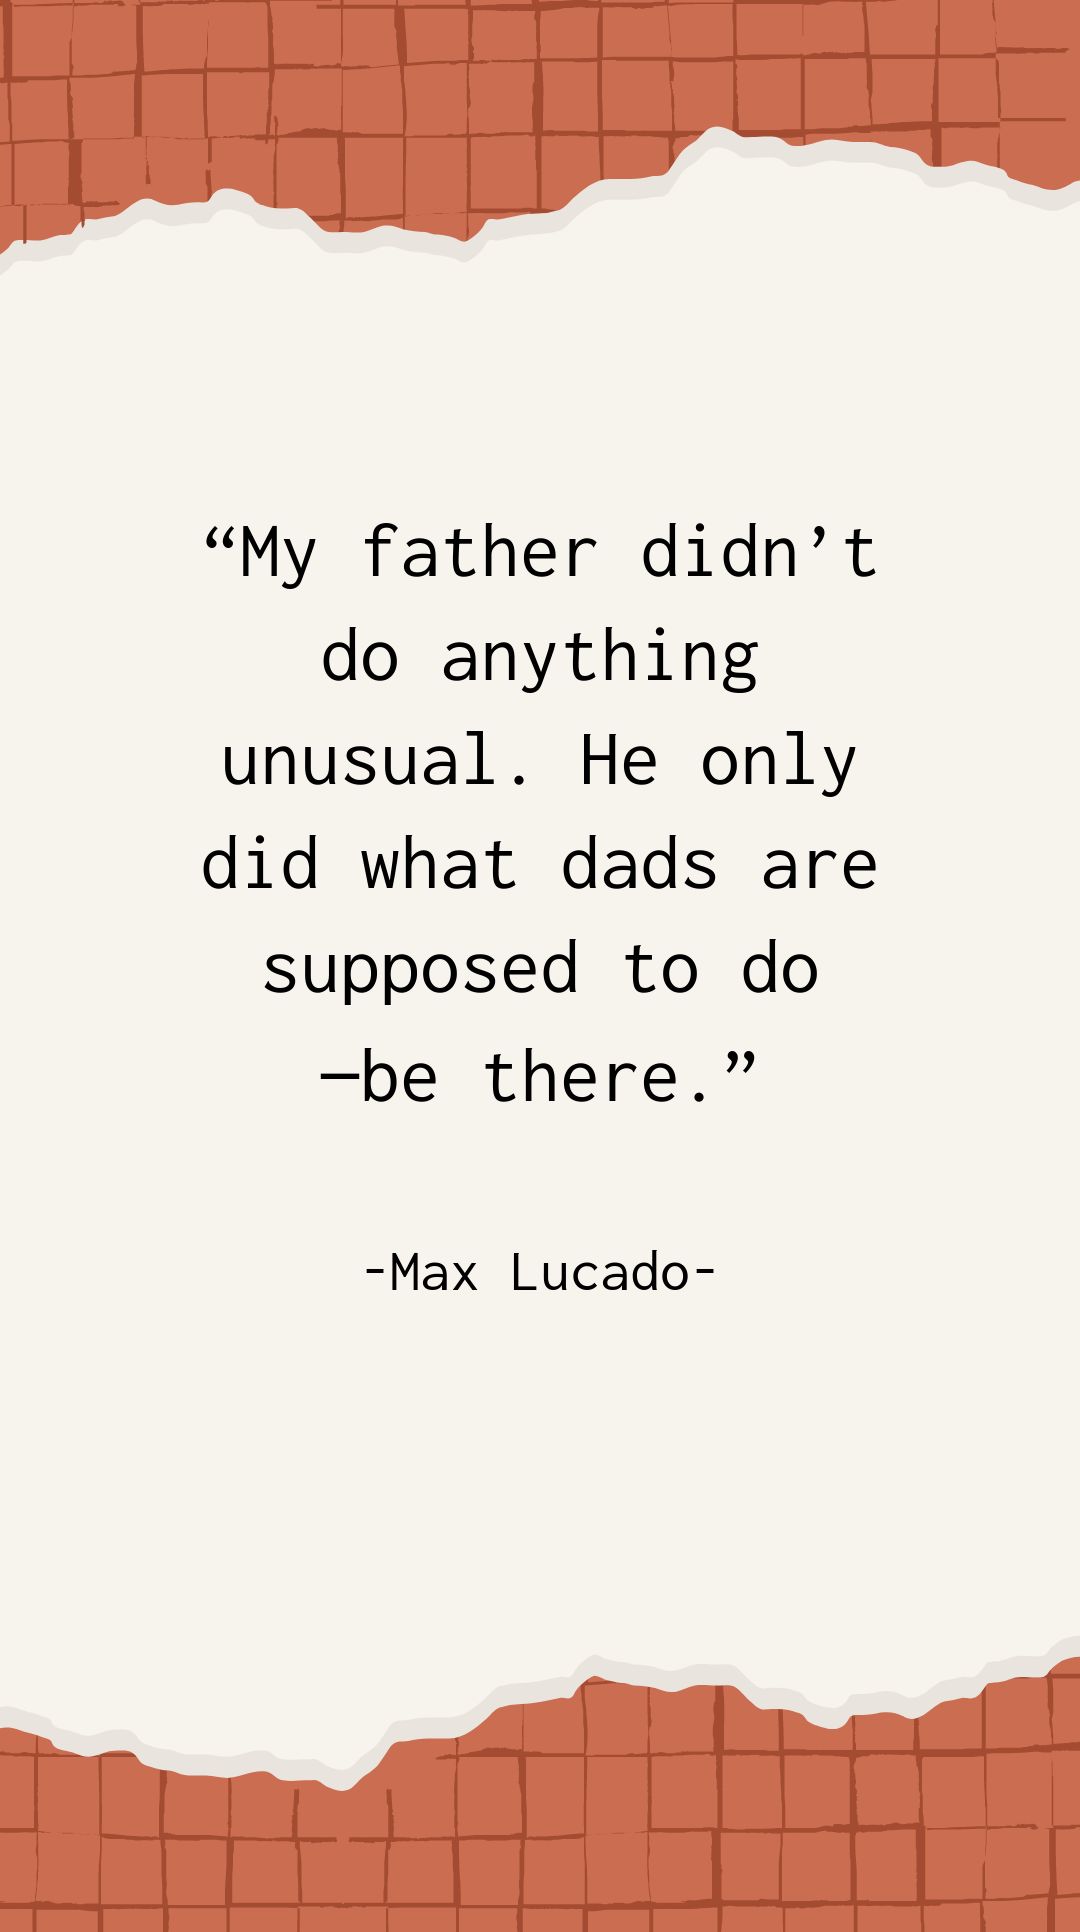 Free Max Lucado - My father didn’t do anything unusual. He only did what dads are supposed to do be there. in JPG